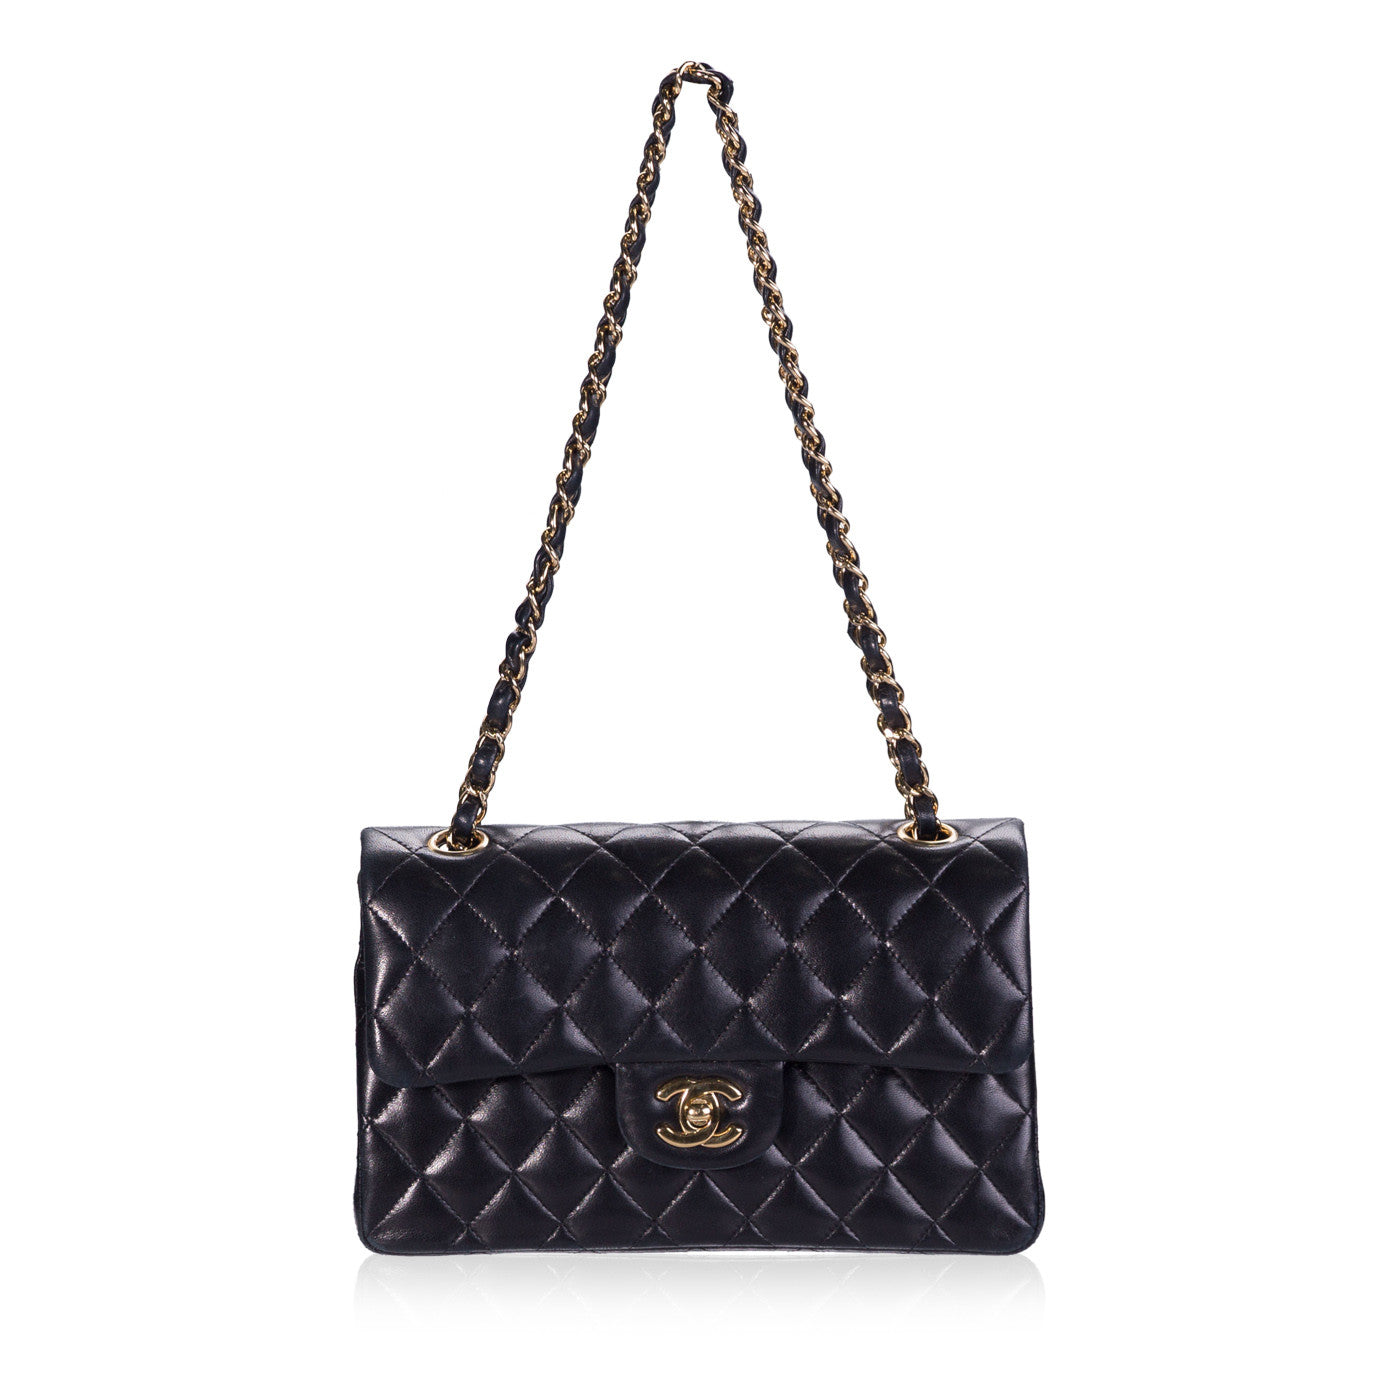 CHANEL Classic Black Quilted Caviar SHW Silver Chain Jumbo Large Flap Bag   eBay